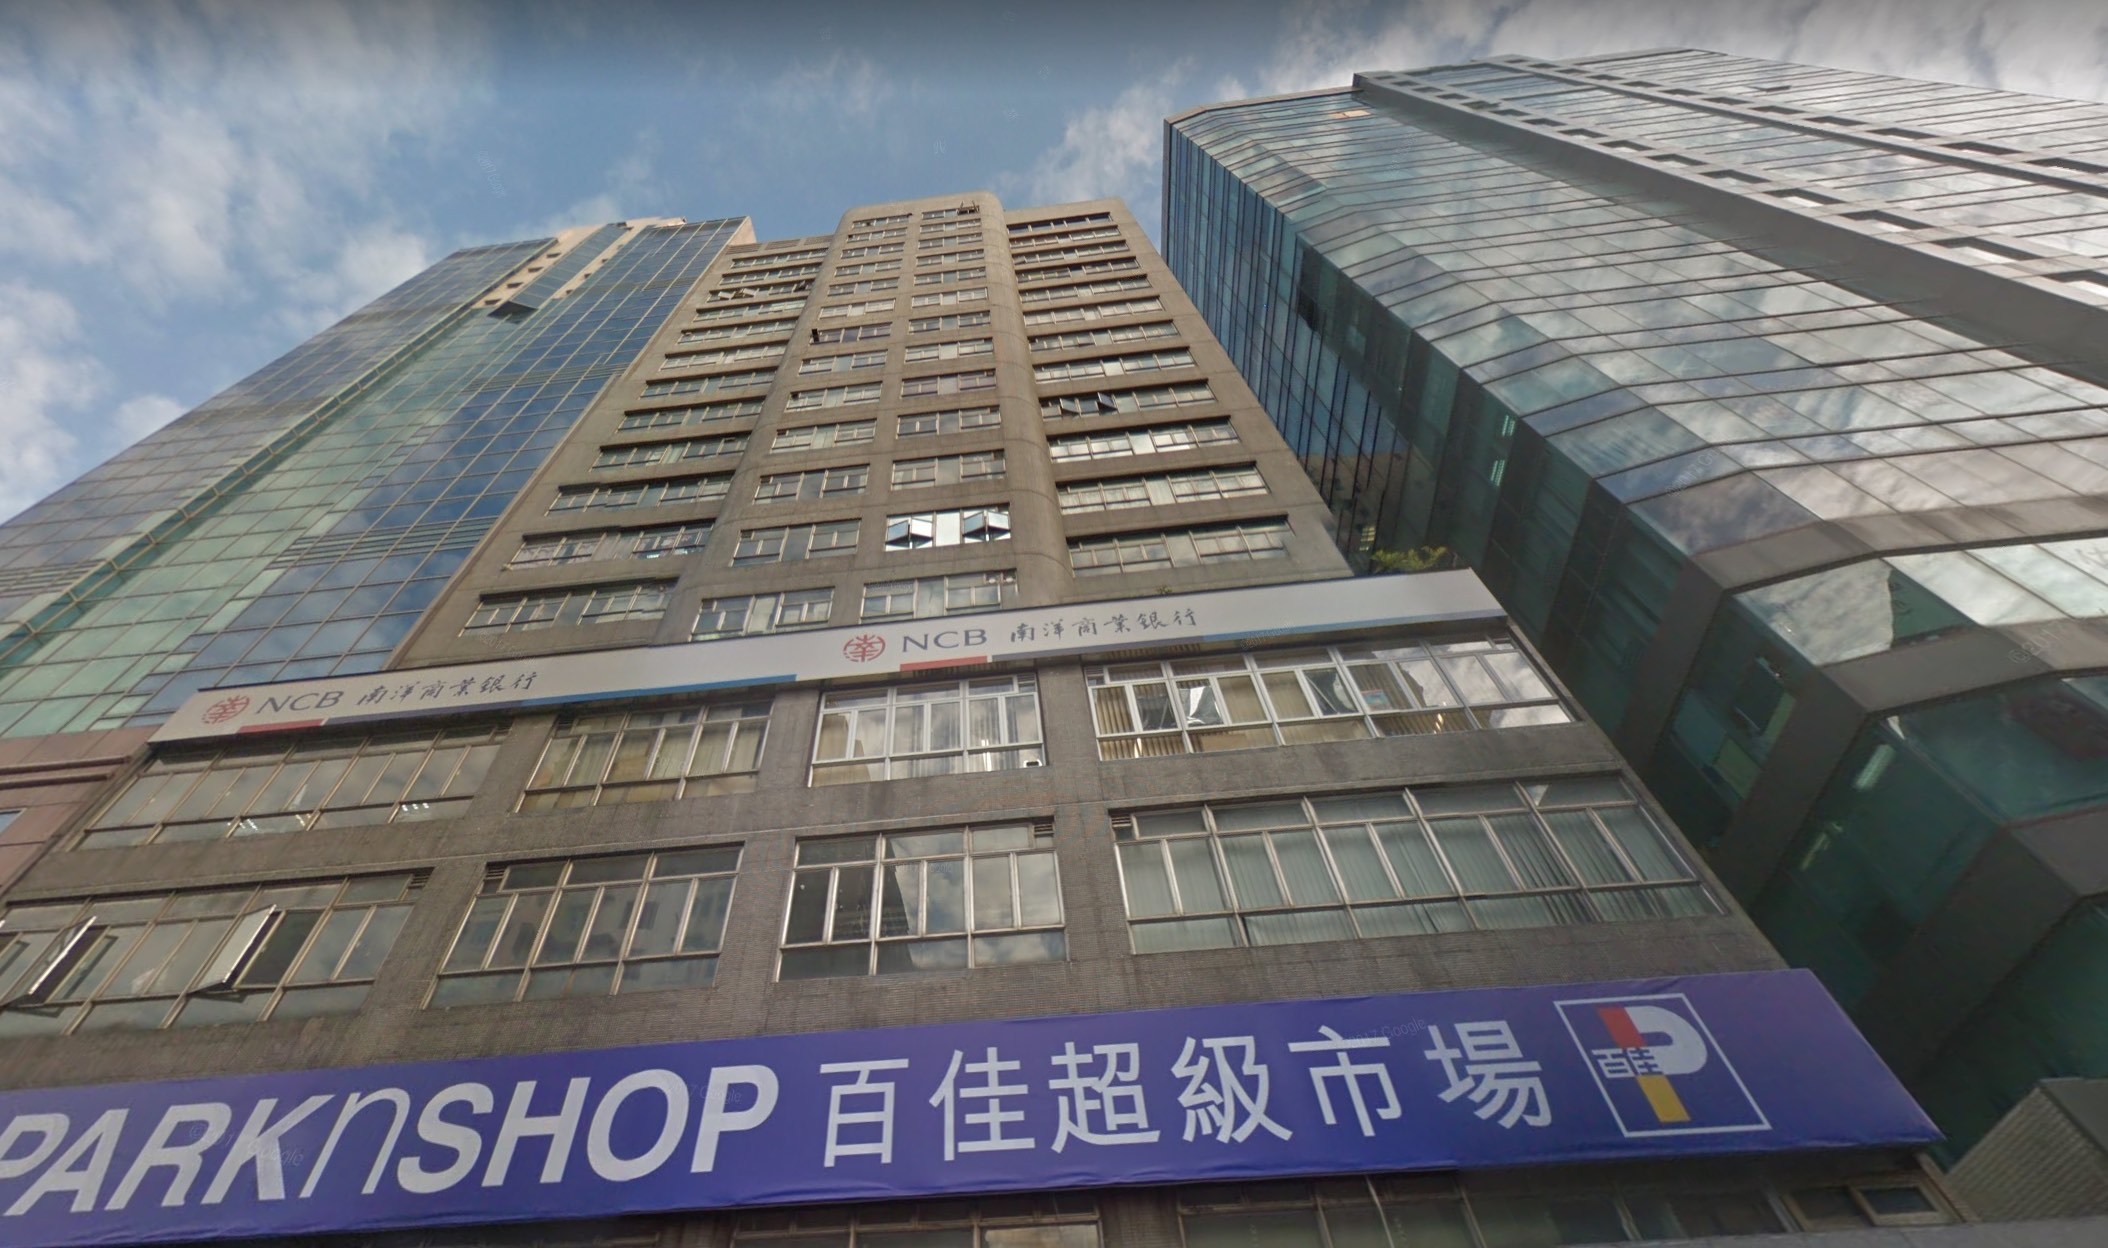 The building (center) that houses Amnesty International’s Hong Kong offices in Kowloon. Photo via Google Maps.